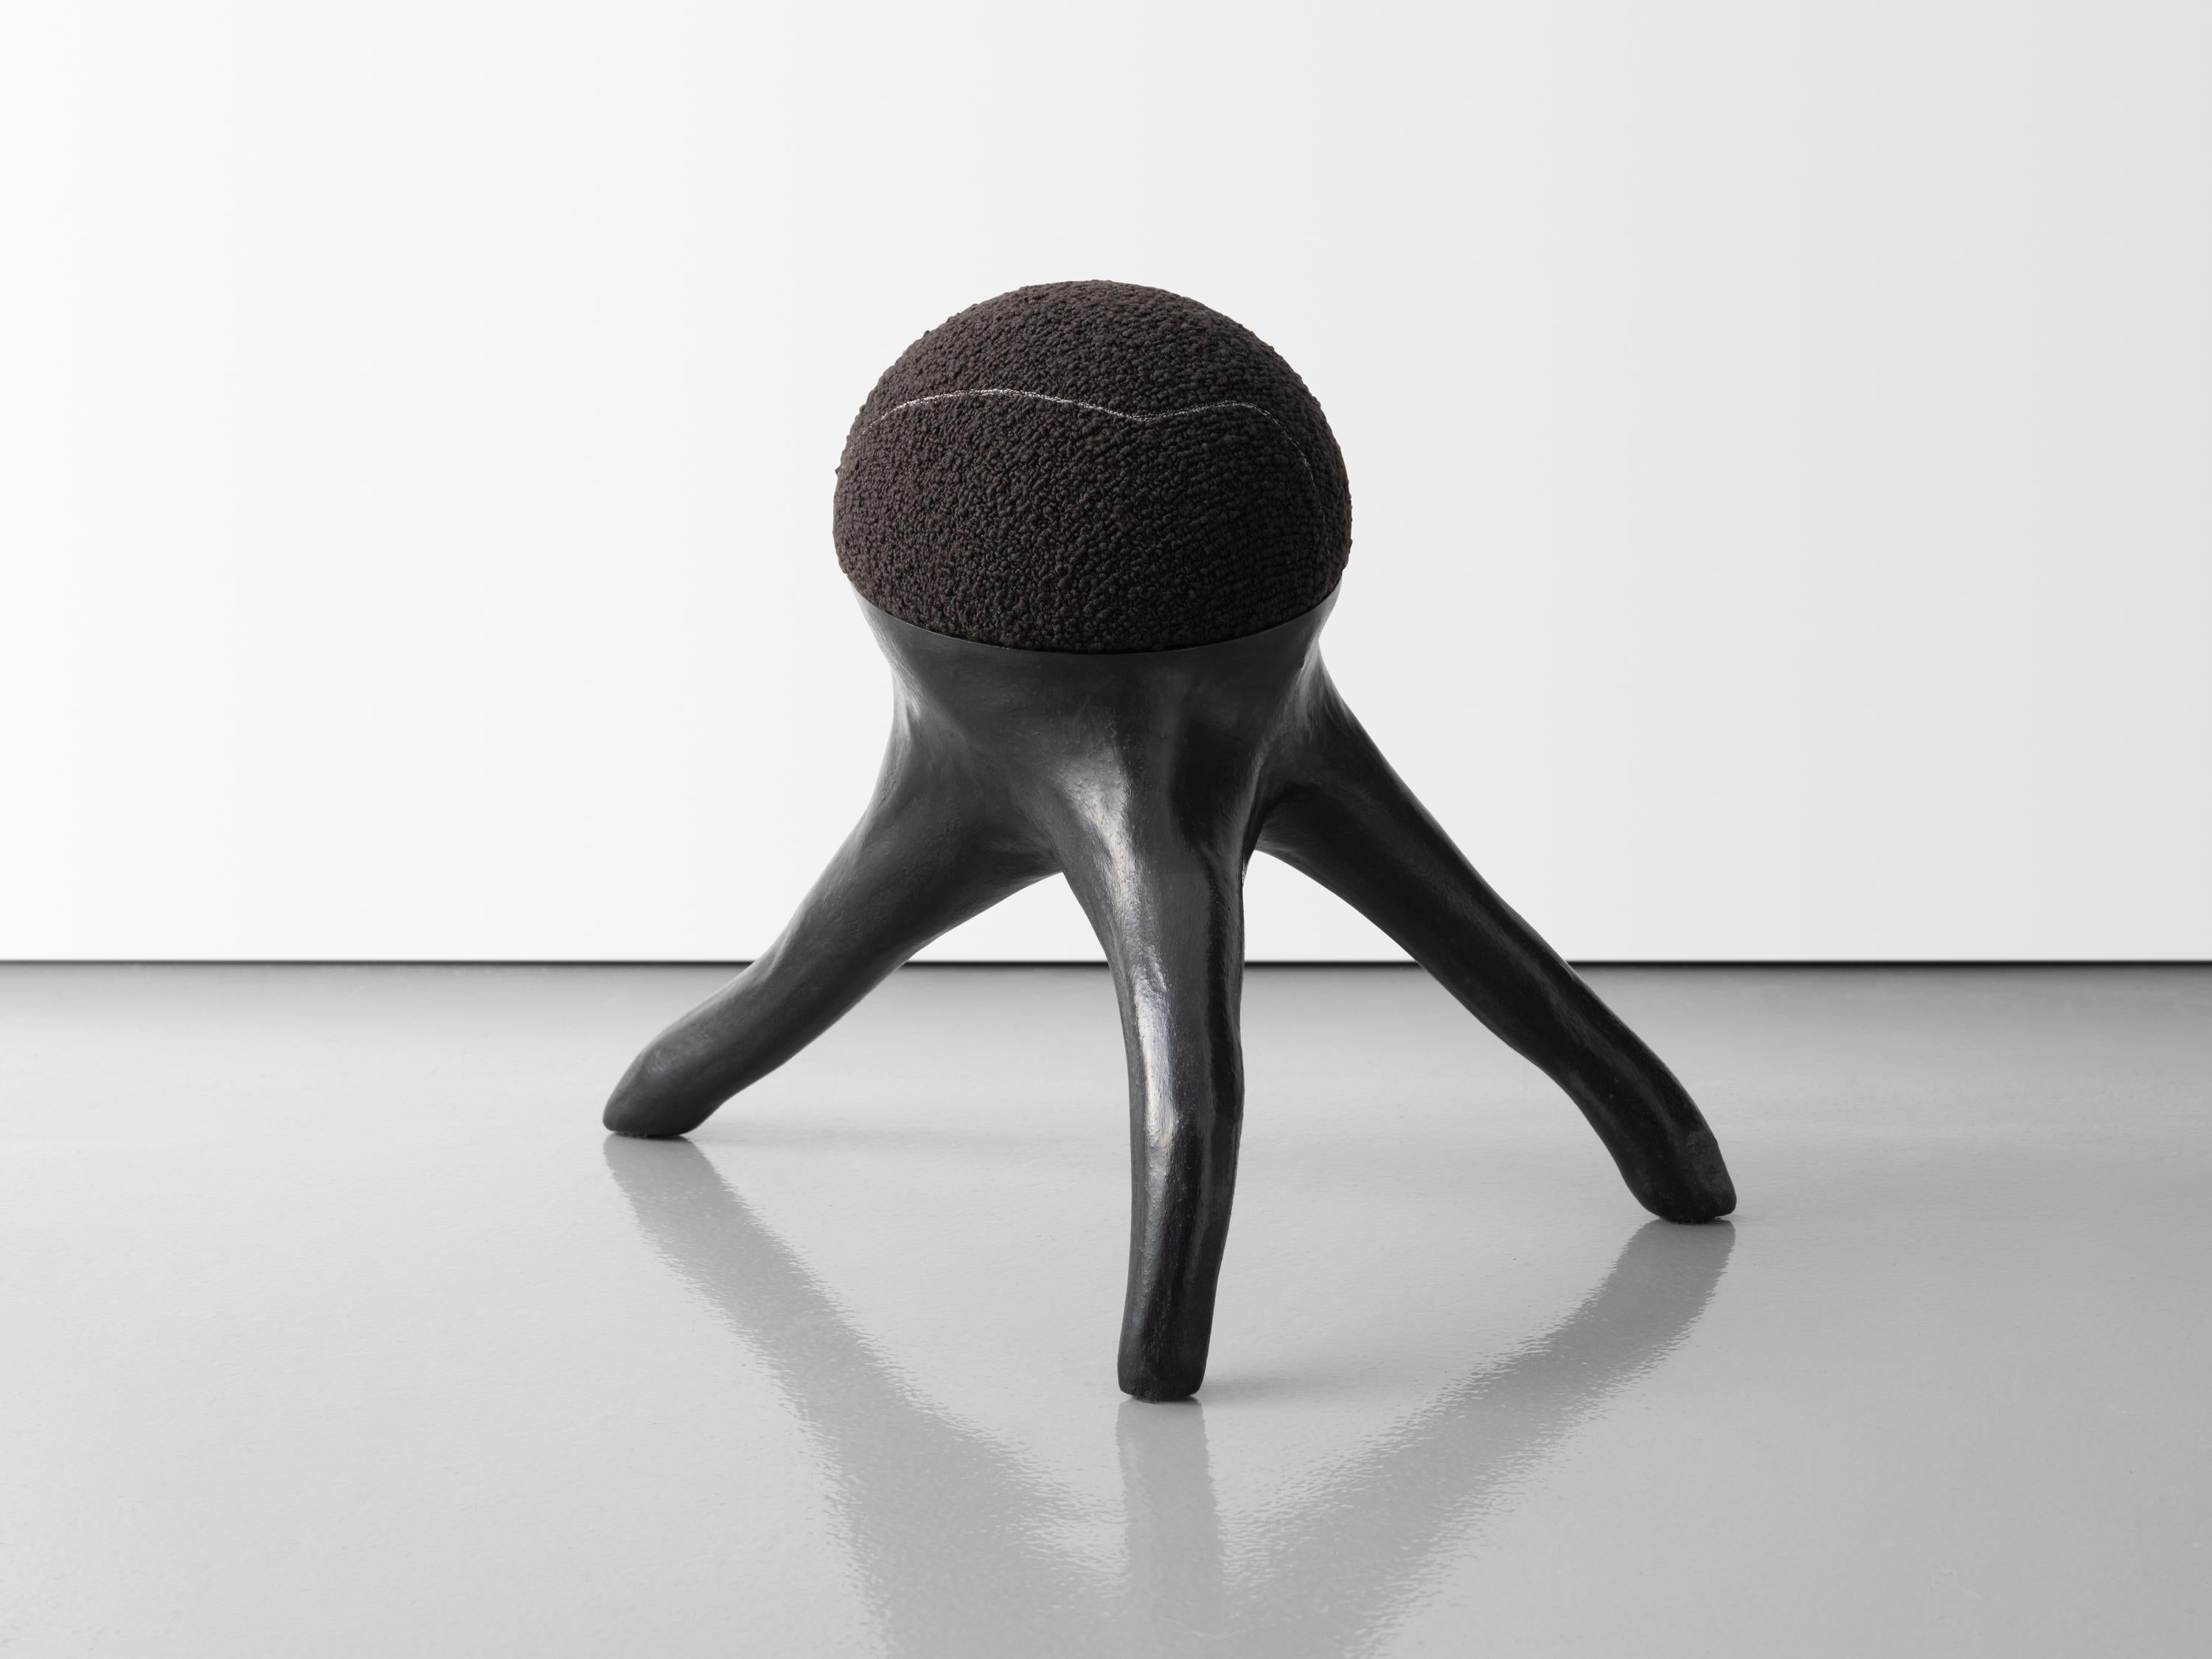 Kavrn mushroom, 2022.
Polished concrete, upholstery.
Measurements: 18 x 22 x 16 in.